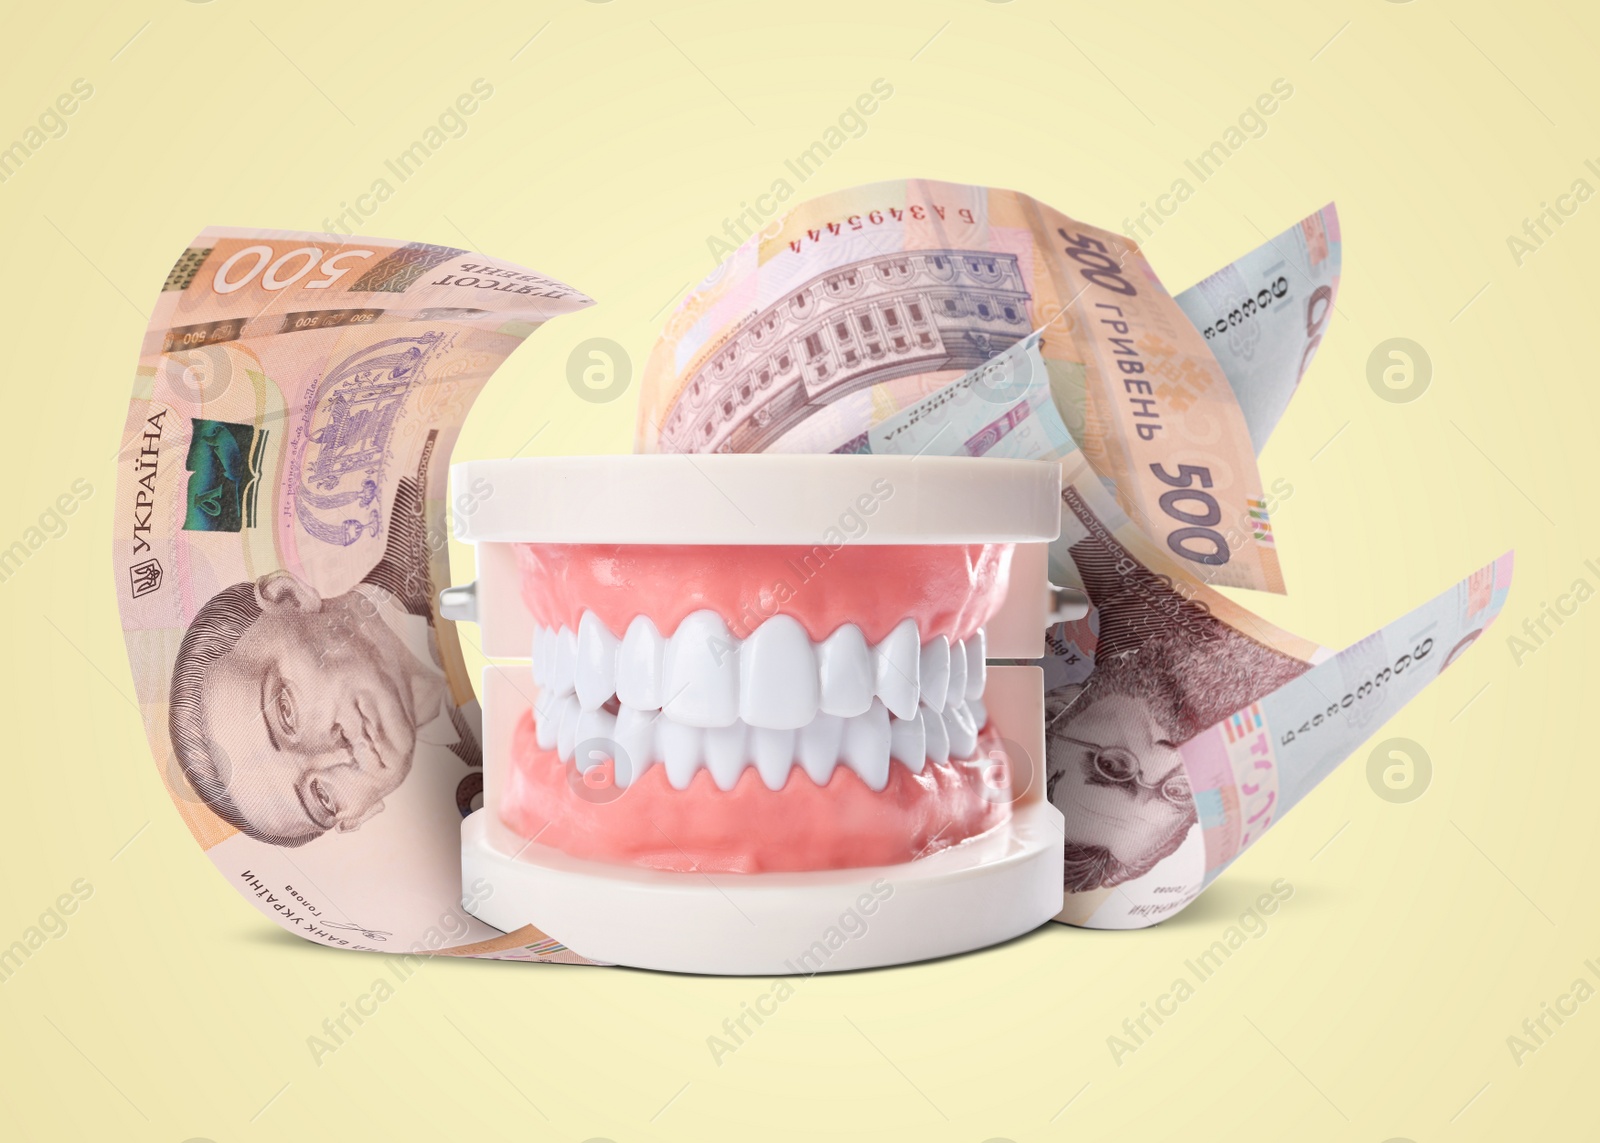 Image of Model of oral cavity with teeth and hryvnia banknotes on beige background. Concept of expensive dental procedures